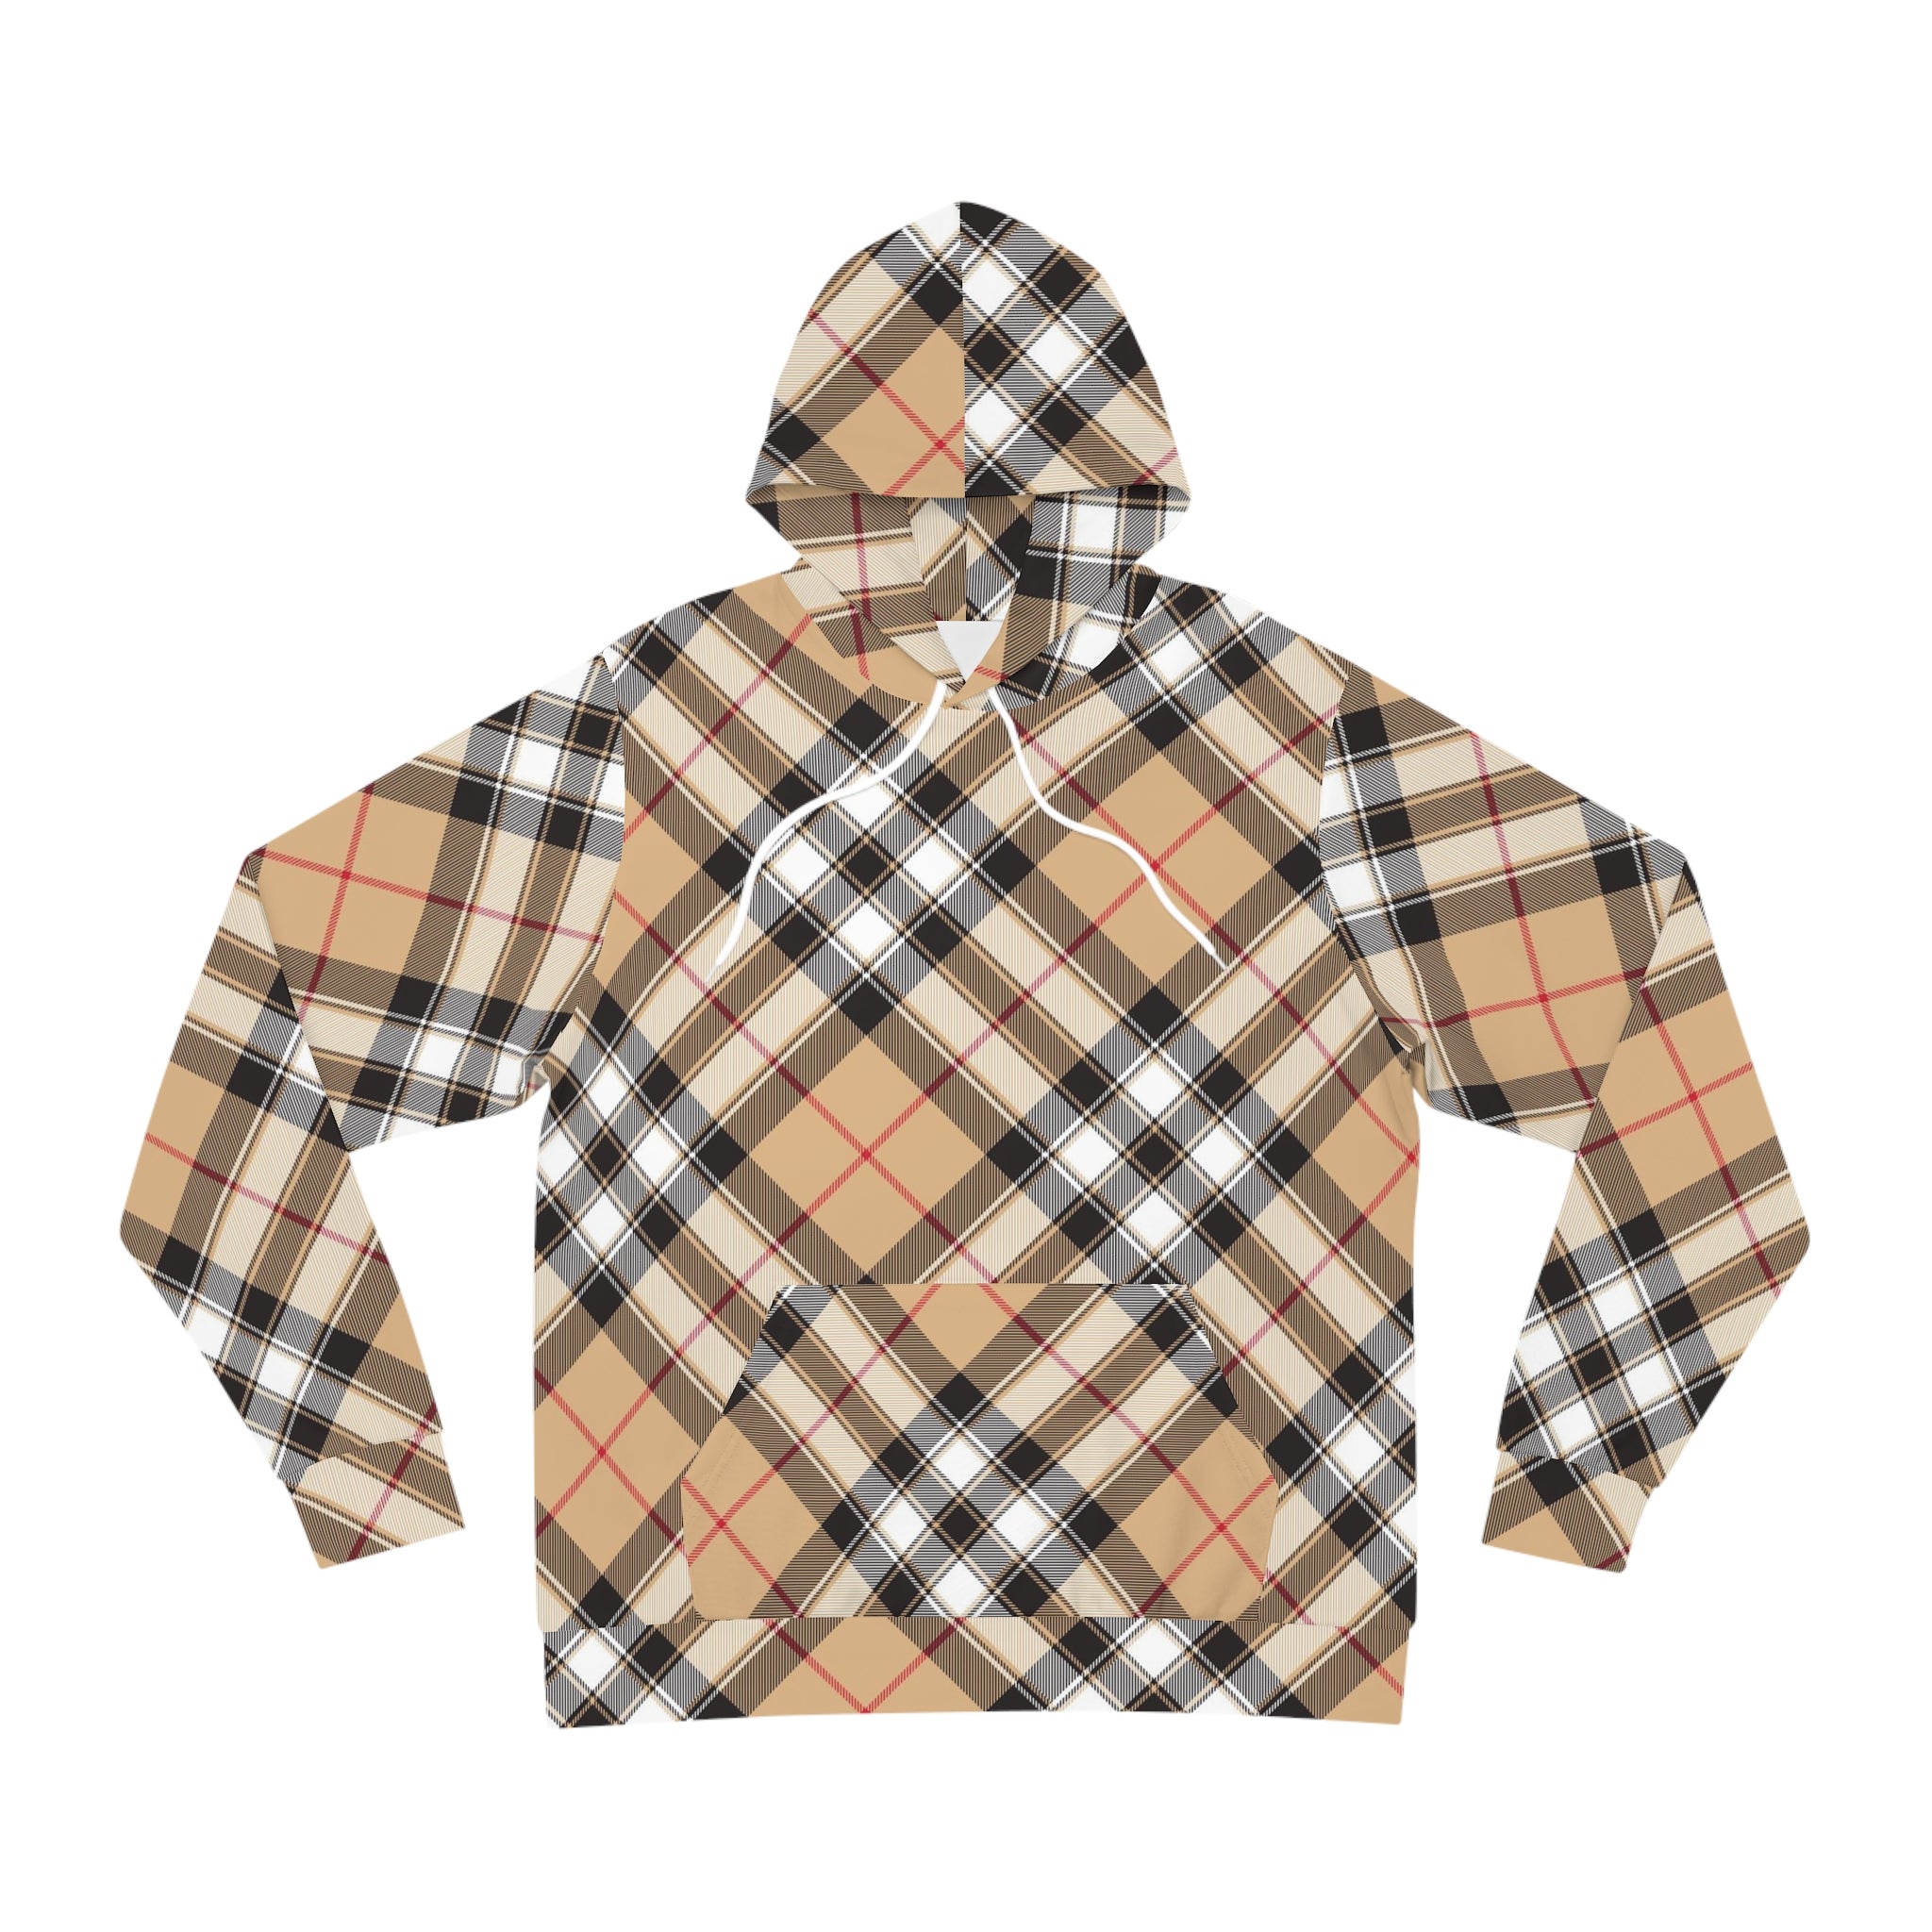  Groove Collection in Plaid (Red Line) Large Print Pullover Fashion Hoodie All Over PrintsSSeamthreadcolorautomaticallymatchedtodesign